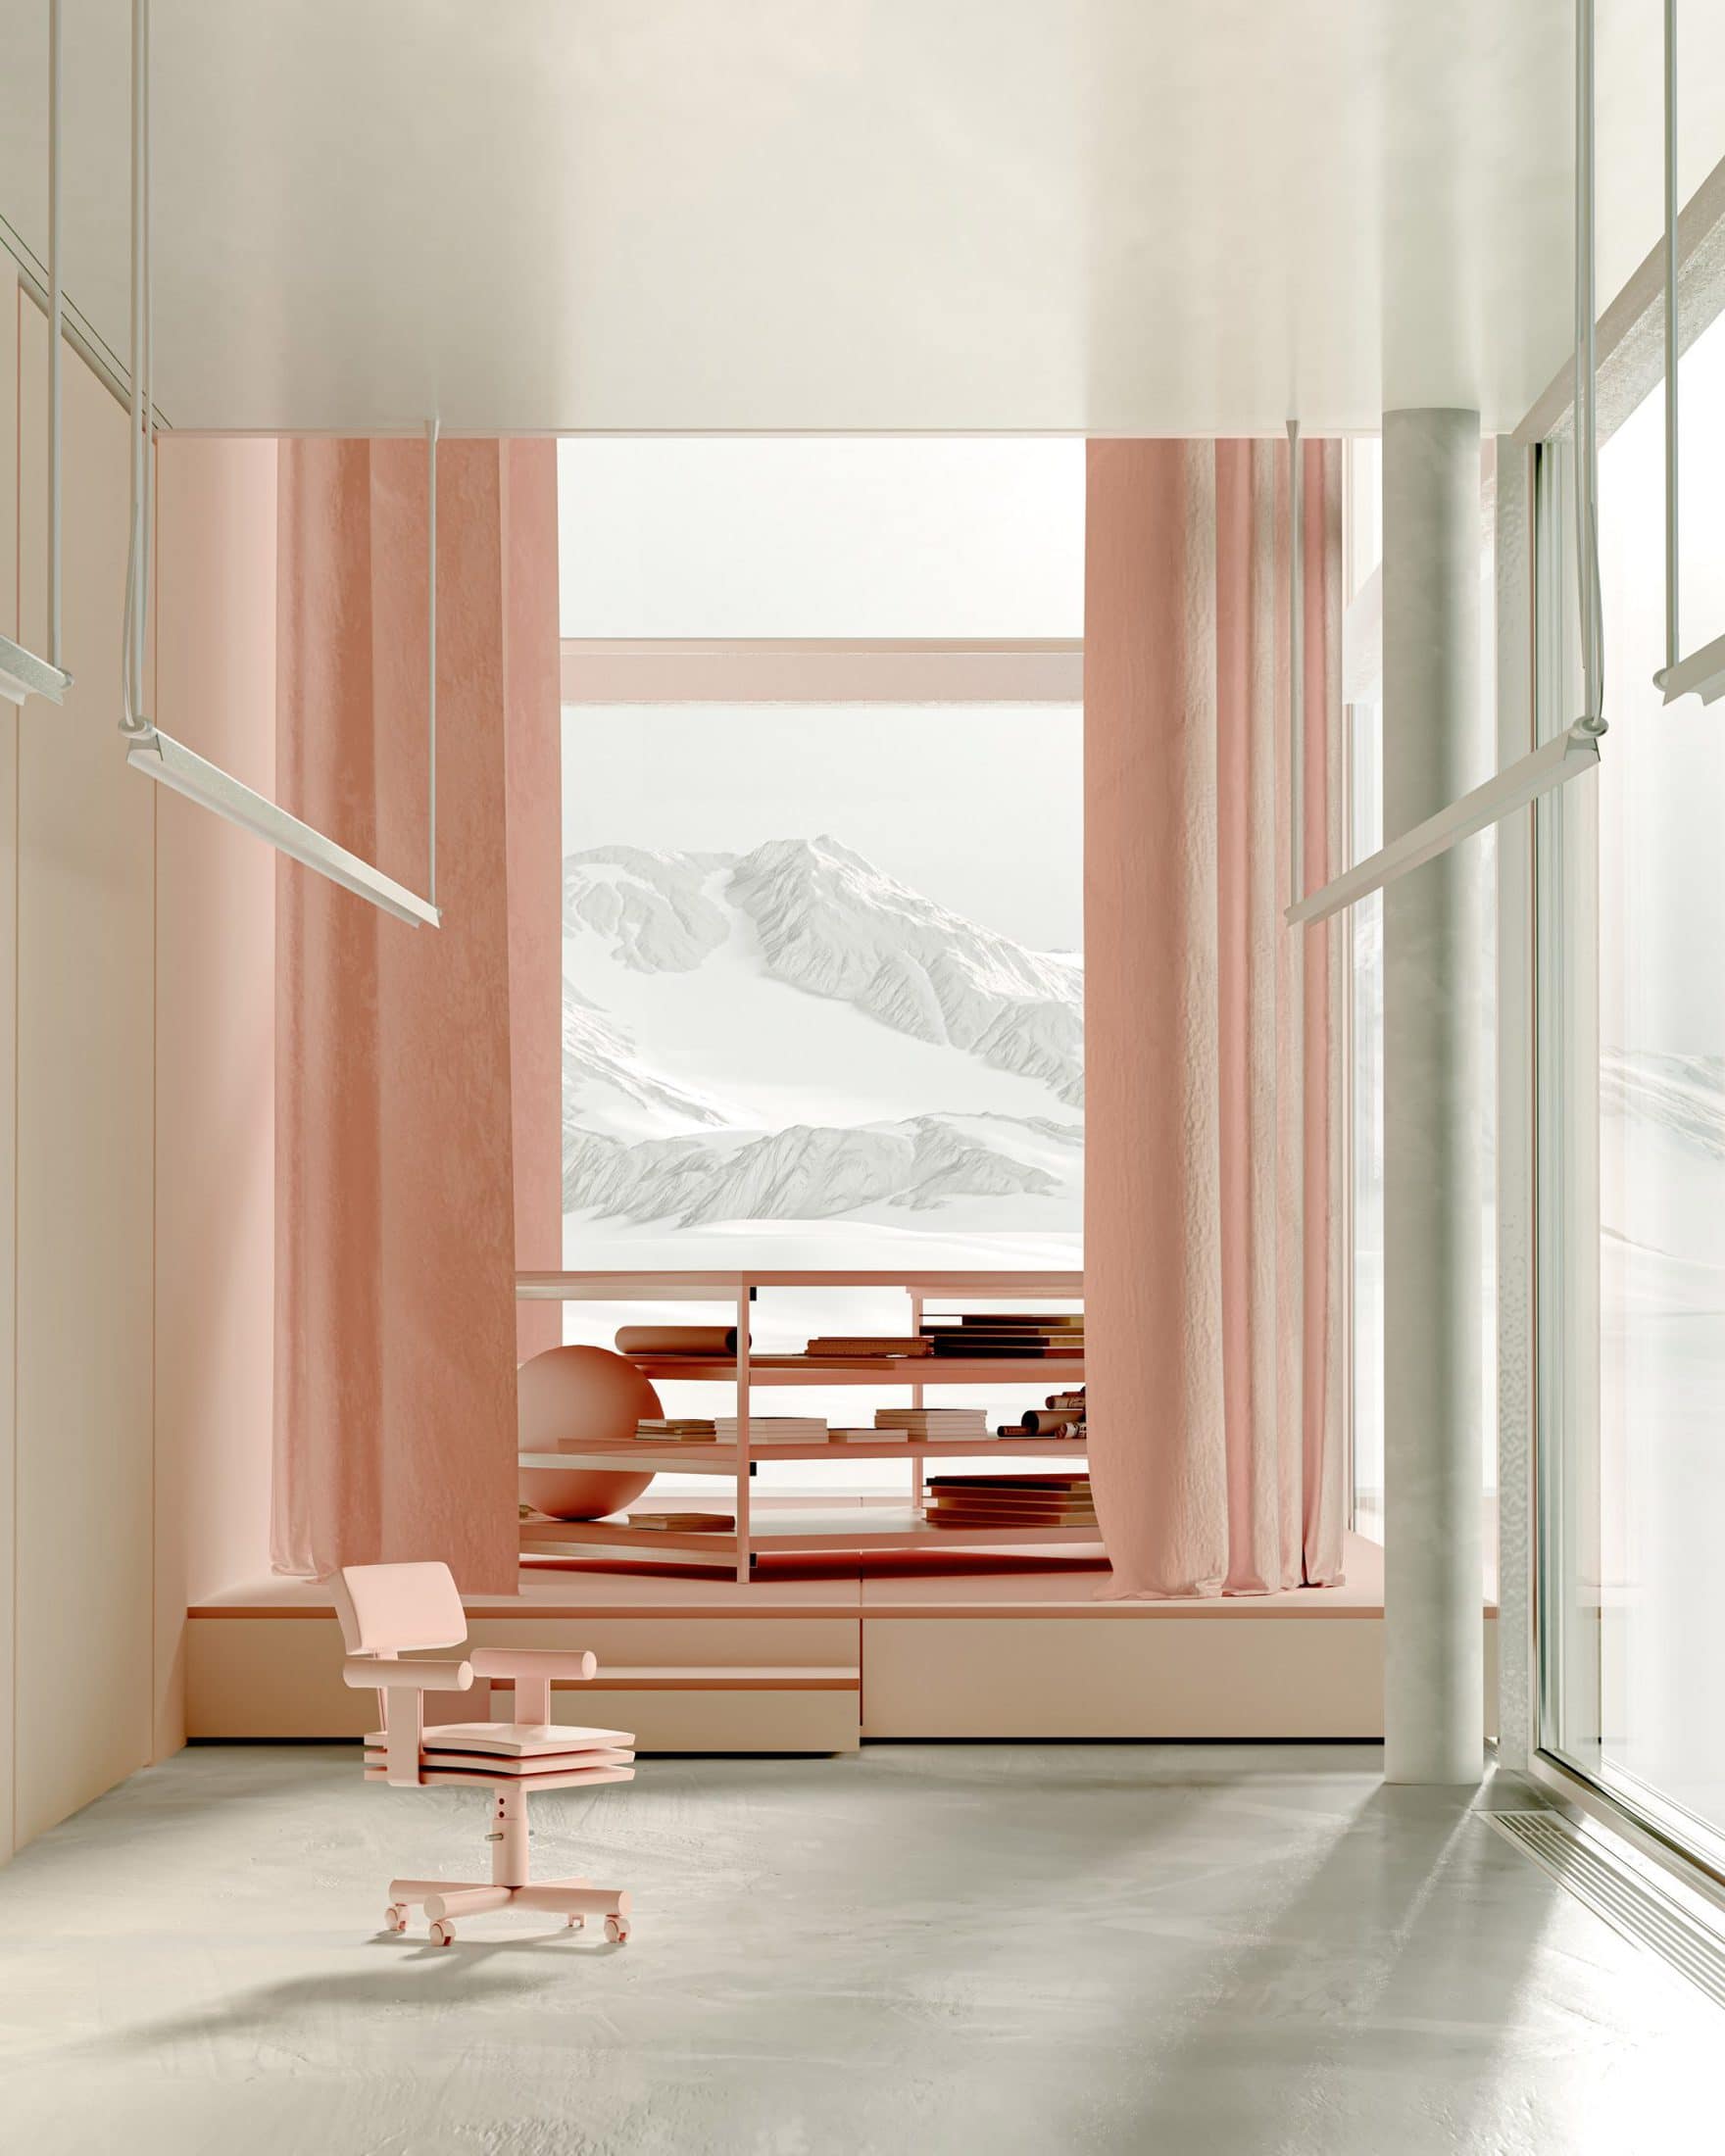 andres reisigner winter house metaverse architecture dezeen 2364 col 5 scaled 1